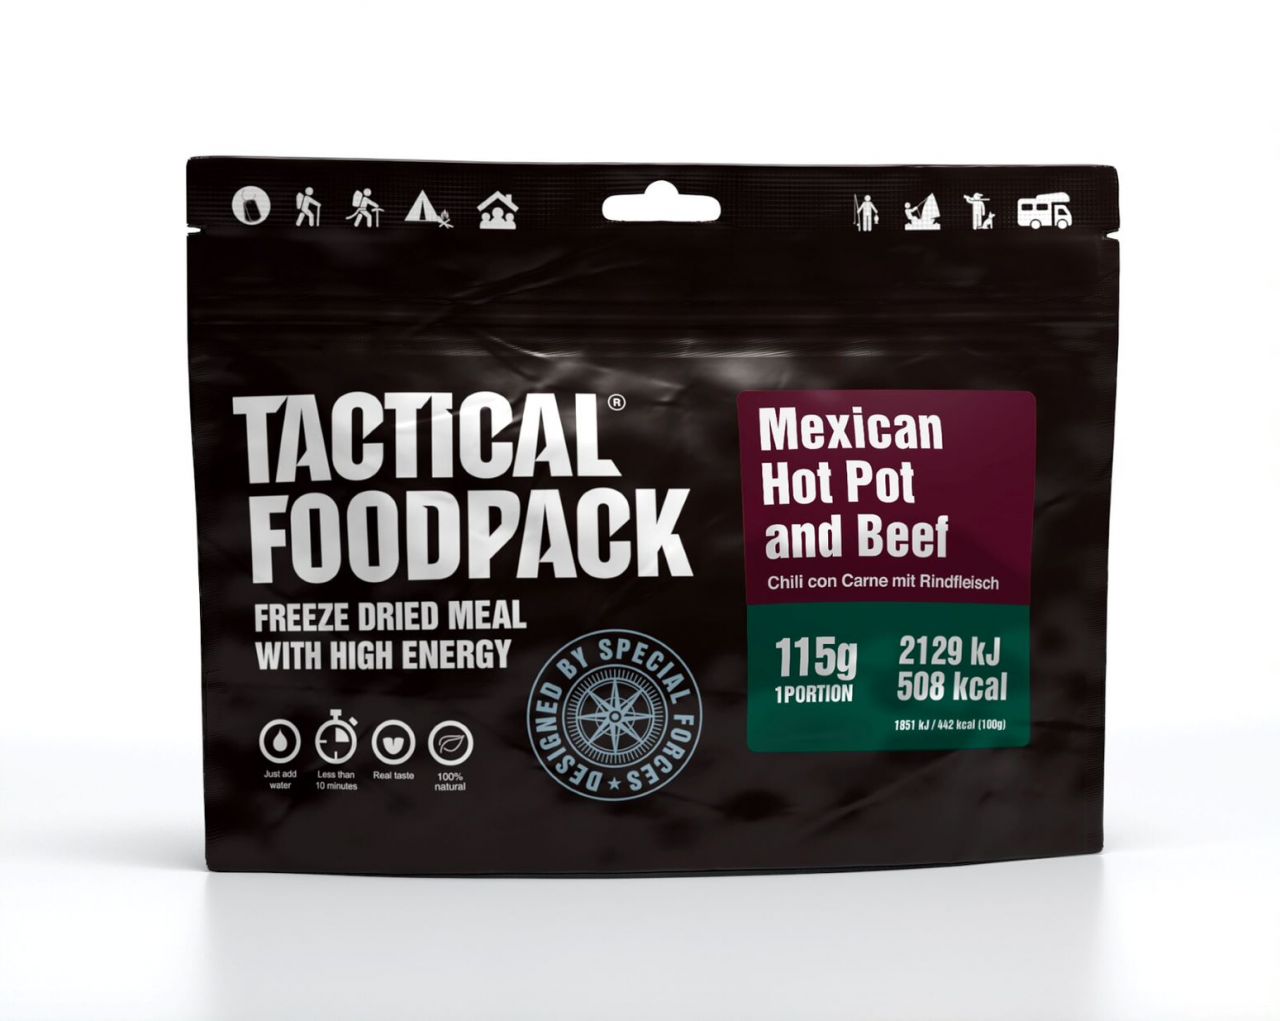 Image of Tactical Foodpack - Mexican Hot Pot and Beef (Chili con Carne mit Rindfleisch)